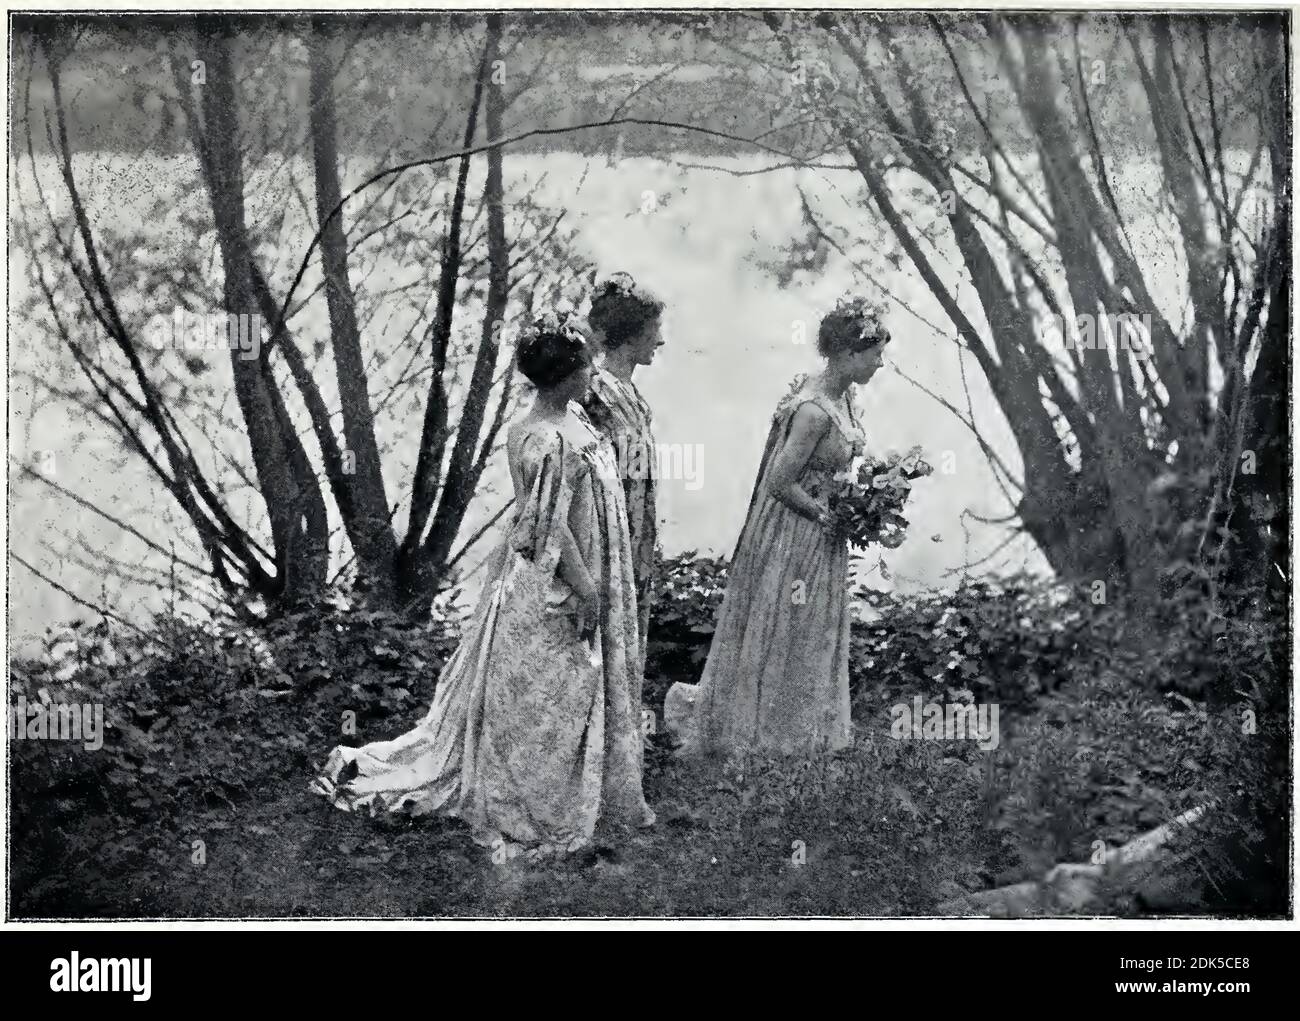 Vintage photograph by the French pictorialist photographer Émile Joachim Constant Puyo. 3 women with flowers in their hair in a piece called Theorie. Stock Photo